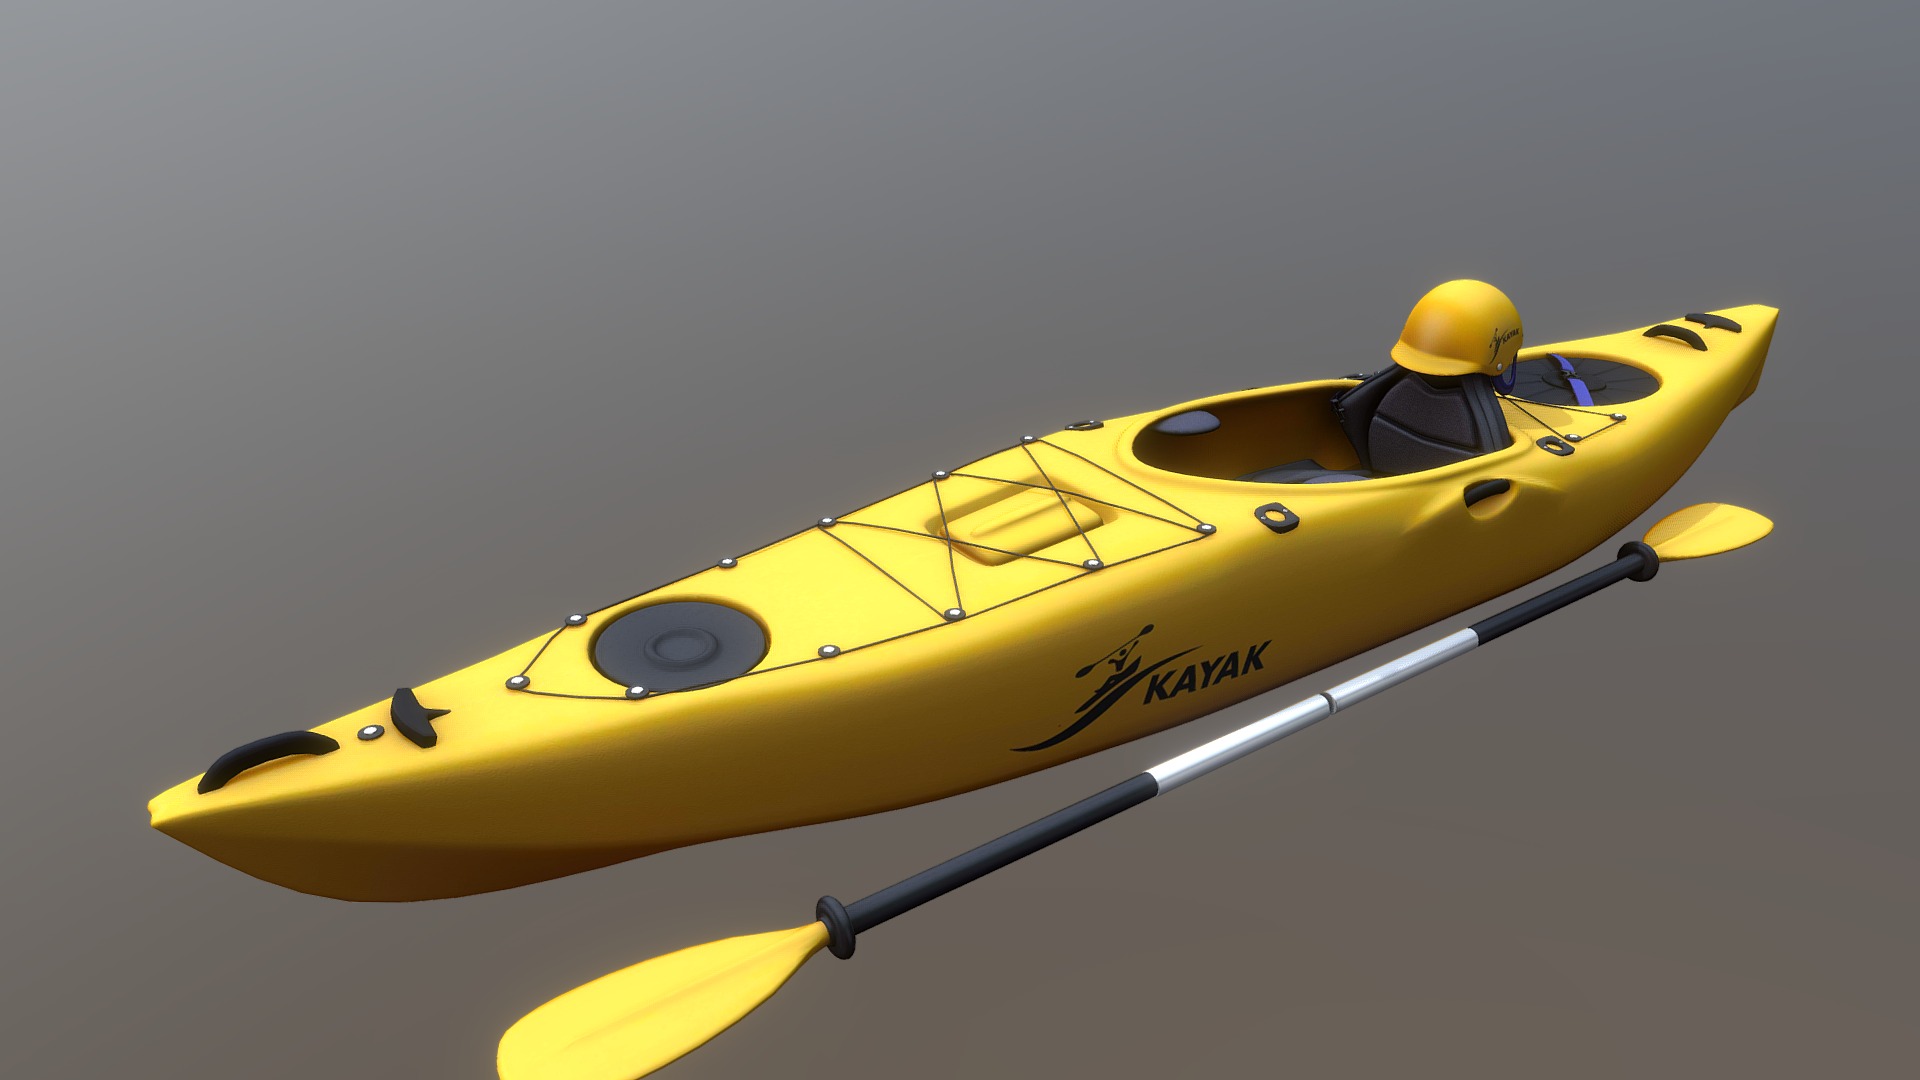 3D model Kayak - This is a 3D model of the Kayak. The 3D model is about a yellow and black jet.